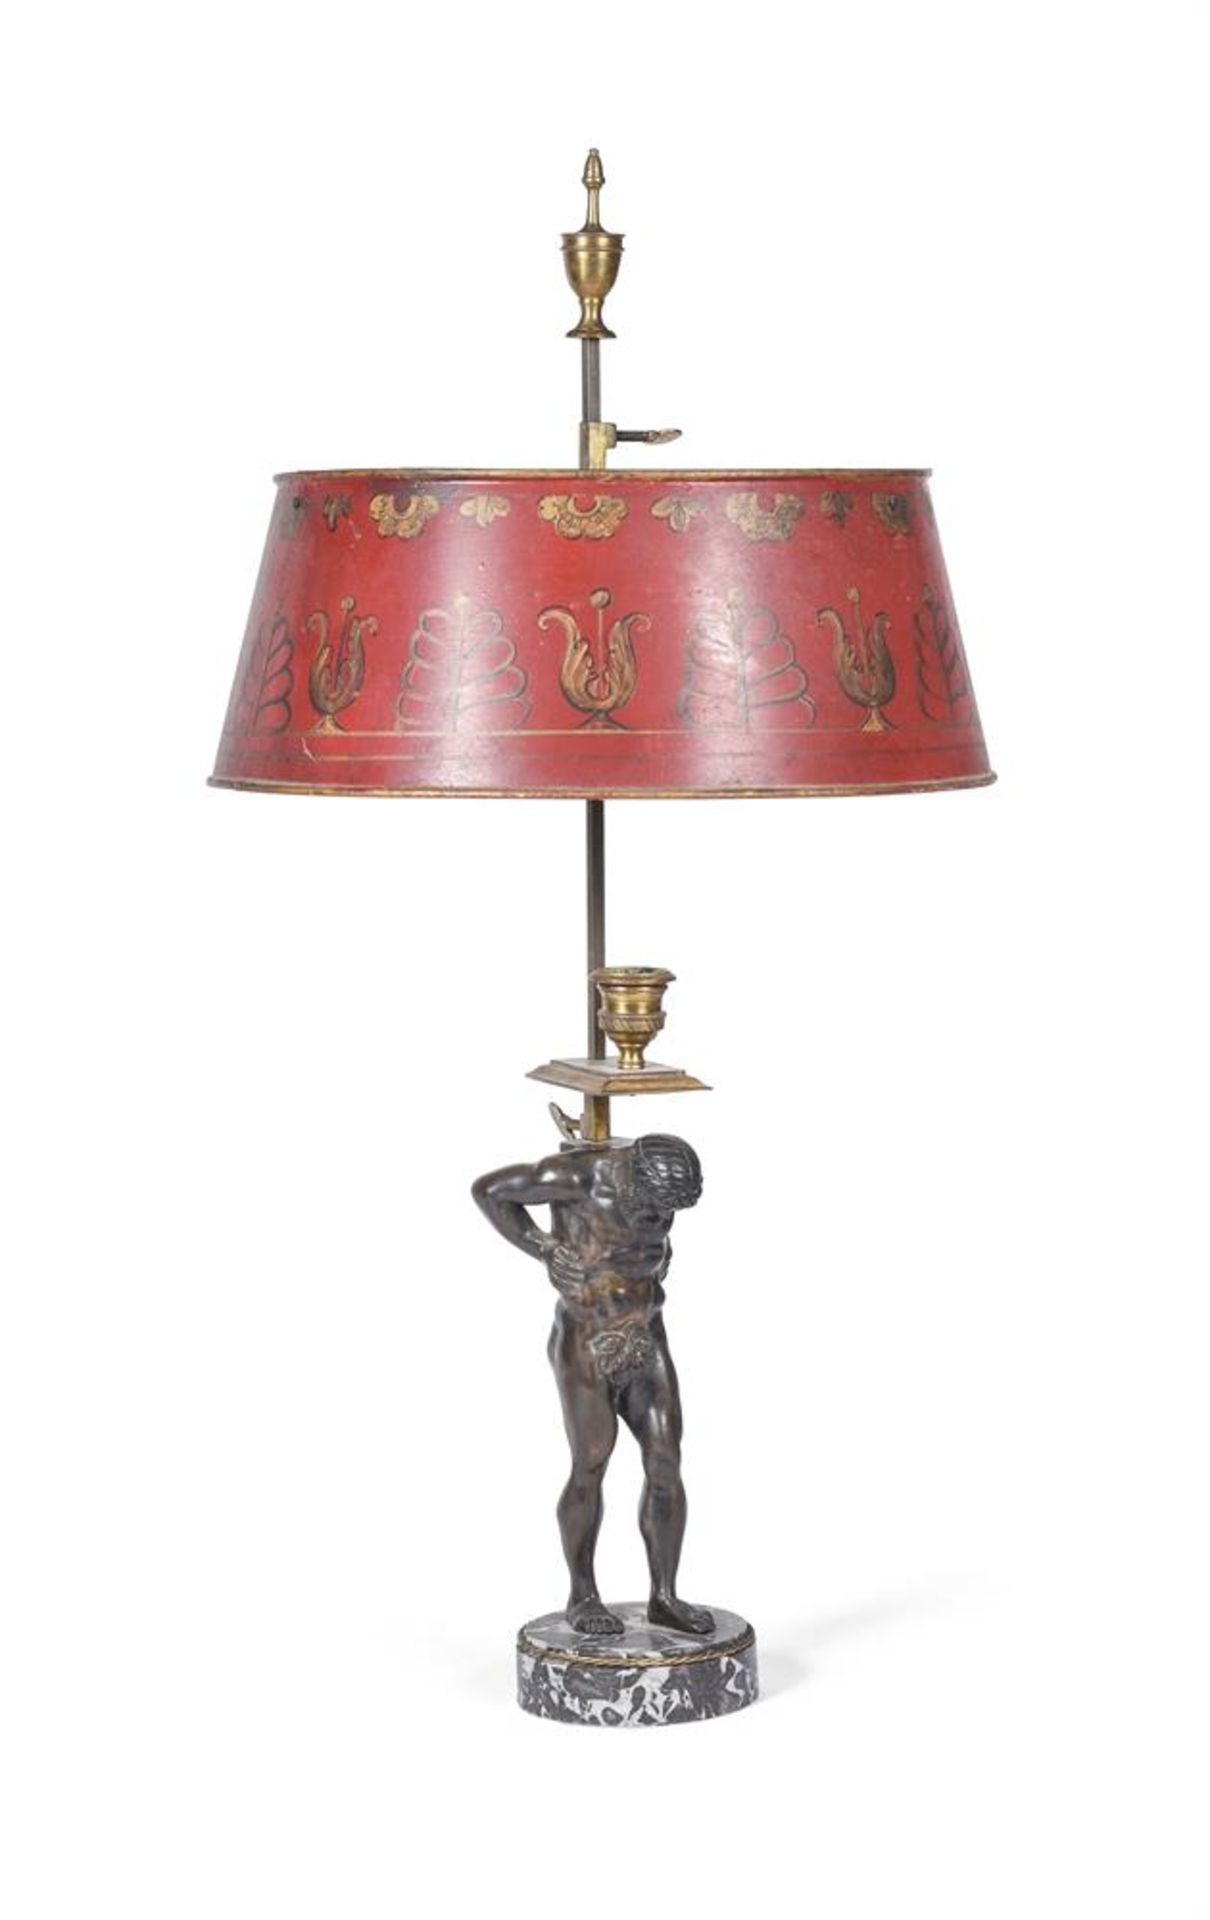 AFTER THE ANTIQUE, A BRONZE FIGURE OF ATLAS, NOW FITTED AS A LAMP, PROBABLY ITALIAN